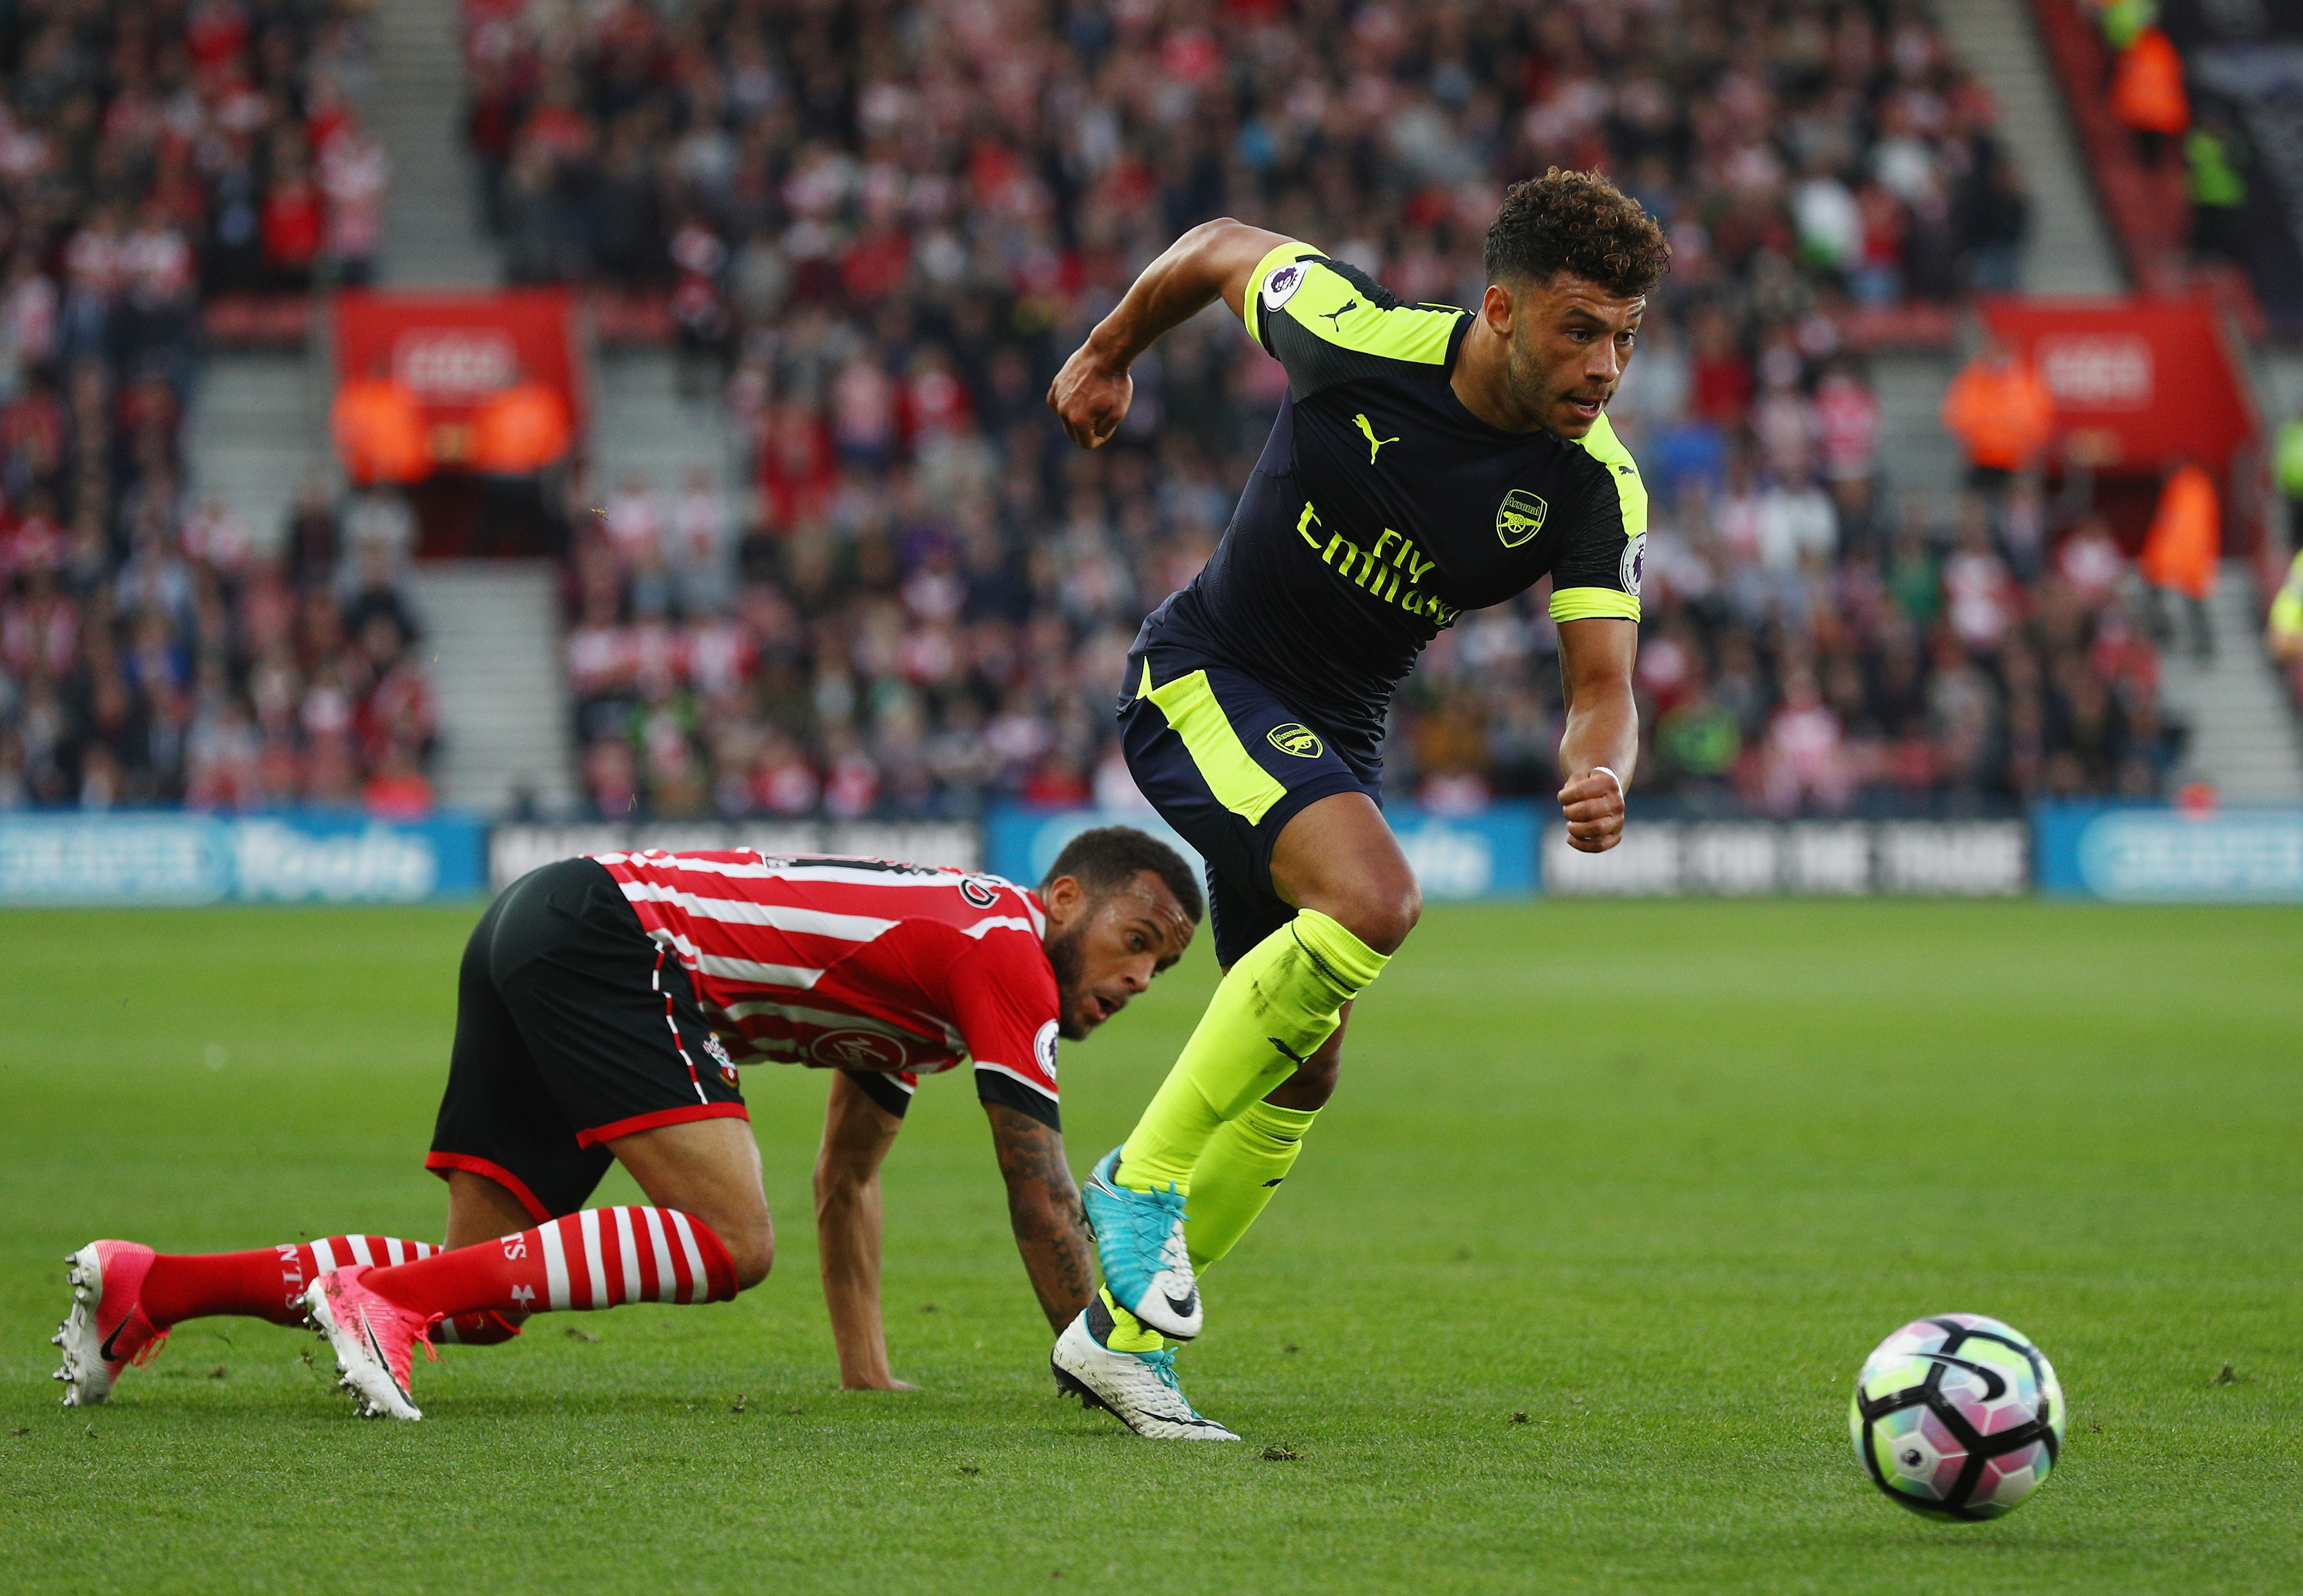 SOUTHAMPTON, ENGLAND - MAY 10:  Alex Oxlade-Chamberlain of Arsenal goes past Nathan Redmond of Southampton during the Premier League match between Southampton and Arsenal at St Mary's Stadium on May 10, 2017 in Southampton, England.  (Photo by Ian Walton/Getty Images)